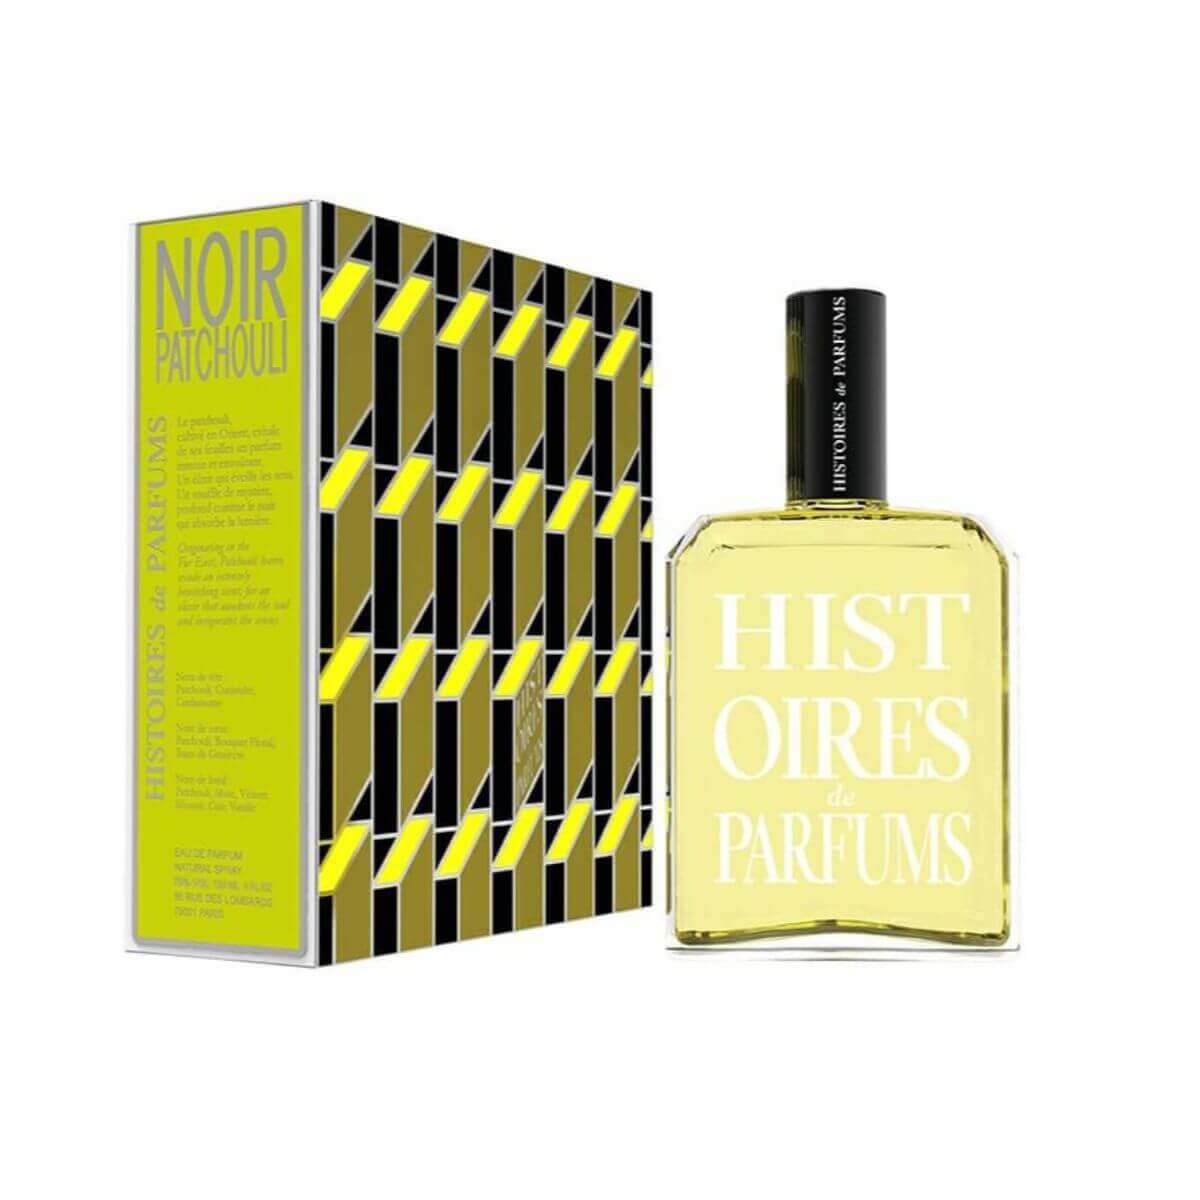 Histoires De Parfum – Noir Patchouli, A Mysterious And Captivating Fragrance For Menan Extraordinary Elixir That Arouses Your Senses With Its Delicate Floral Notesnoir Patchouli A Breath Of MysteryTop Notes: Cardamom, Coriander, PatchouliHeart Notes: Berries, Flowers, PatchouliBase Notes: Leather, Vanilla, Musk, Patchouli.